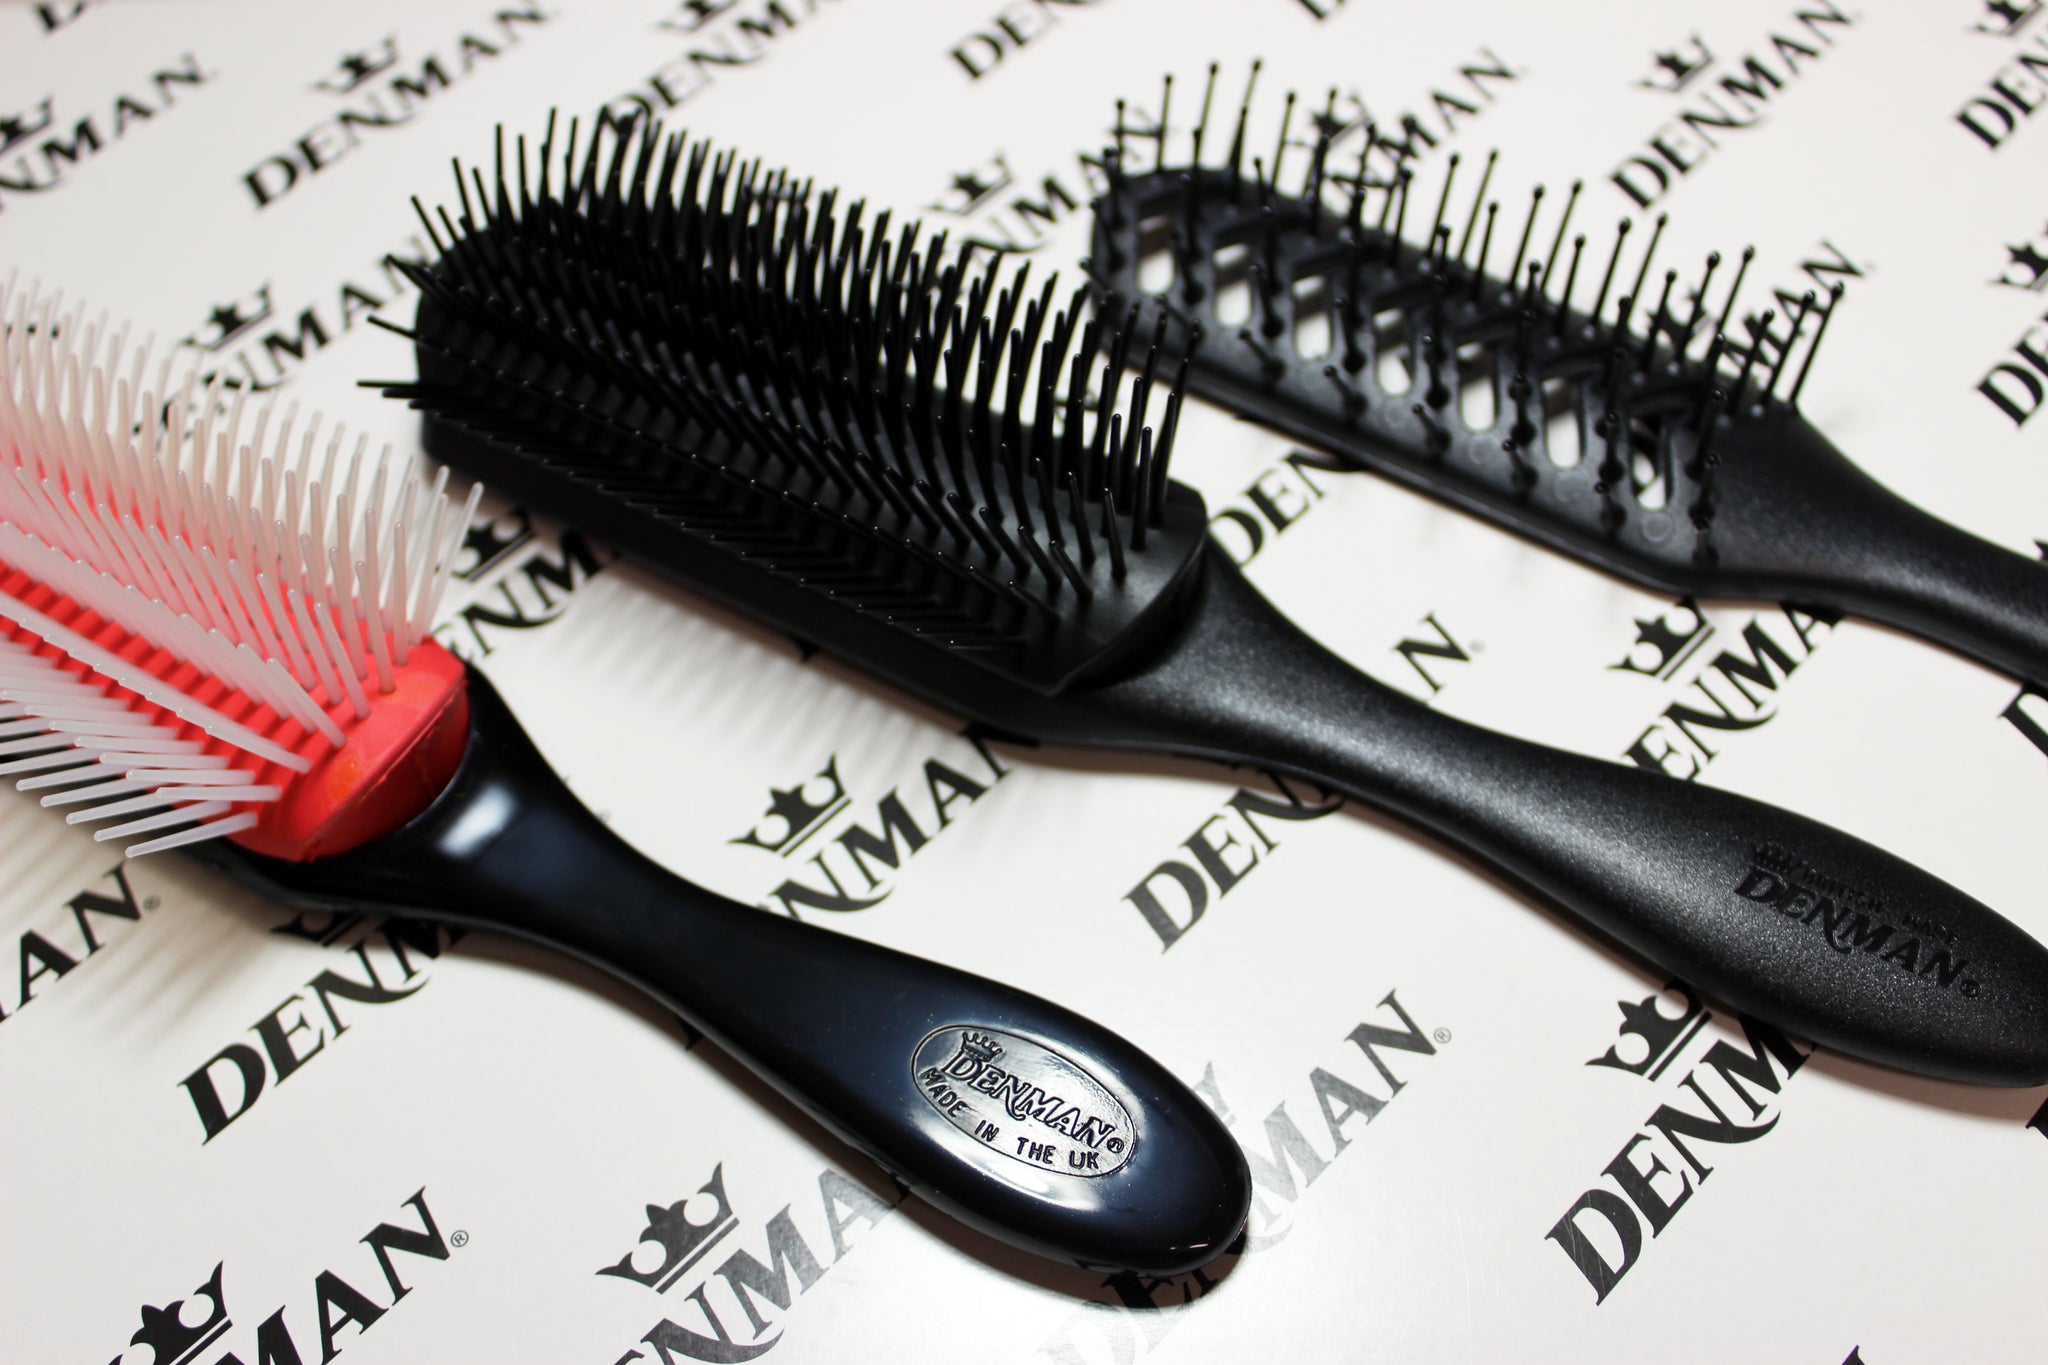 Denman combs and brushes